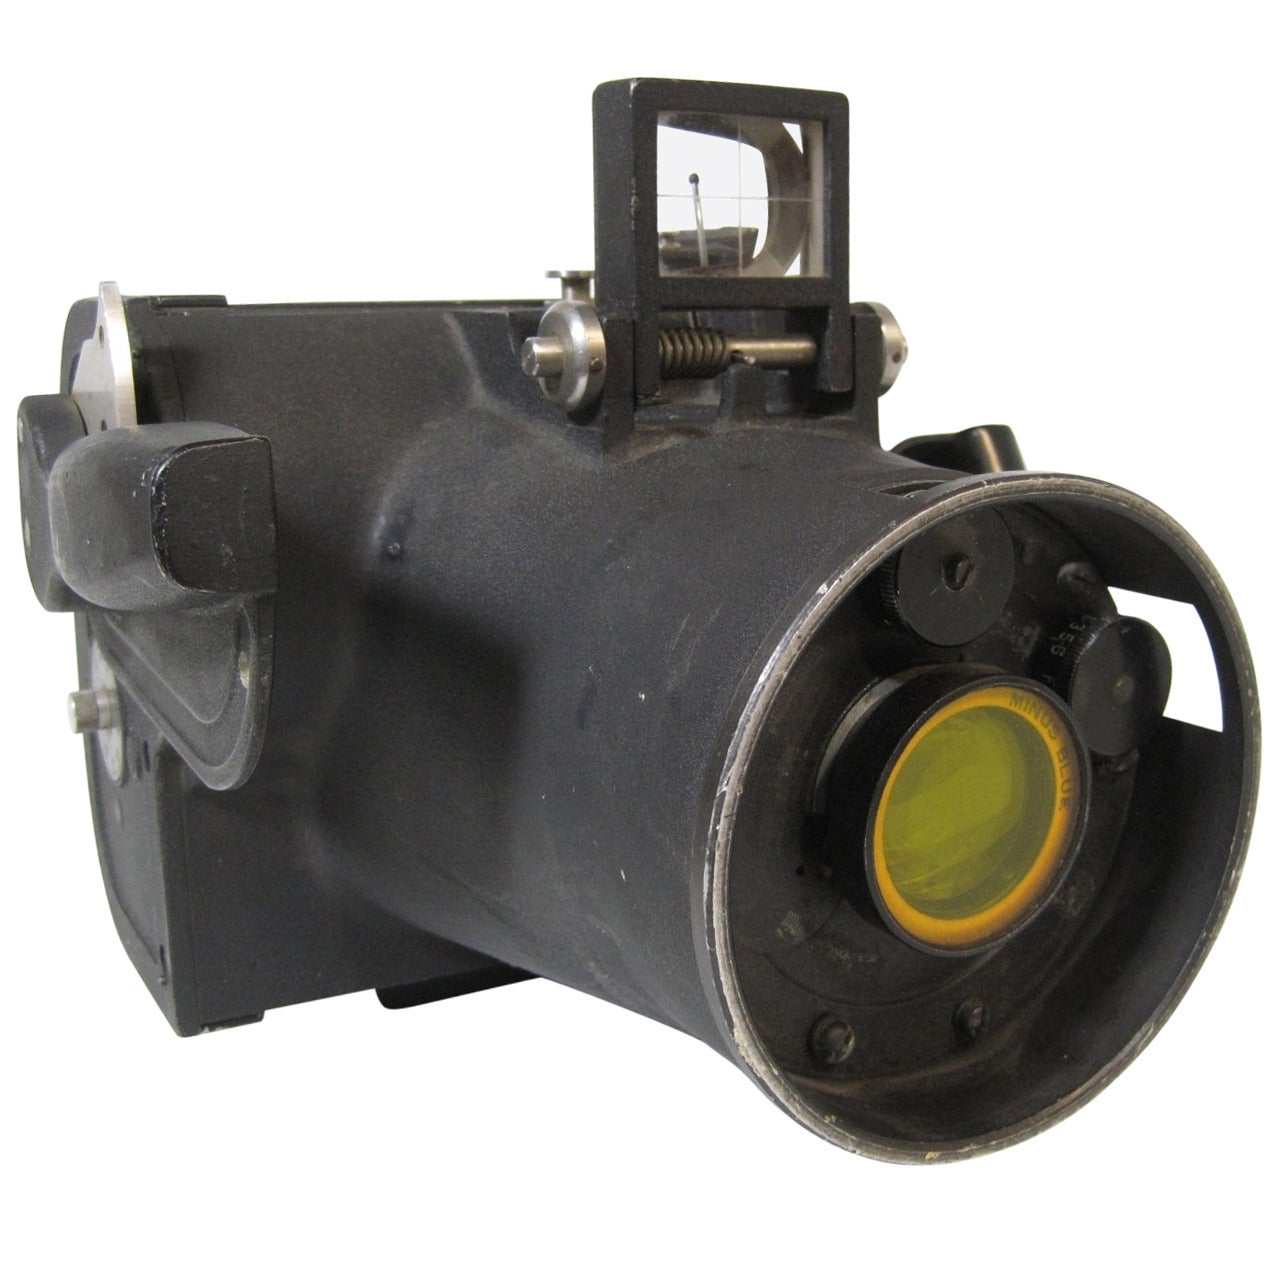 Military Aviation Aerial Photography Camera Used During the Second World War